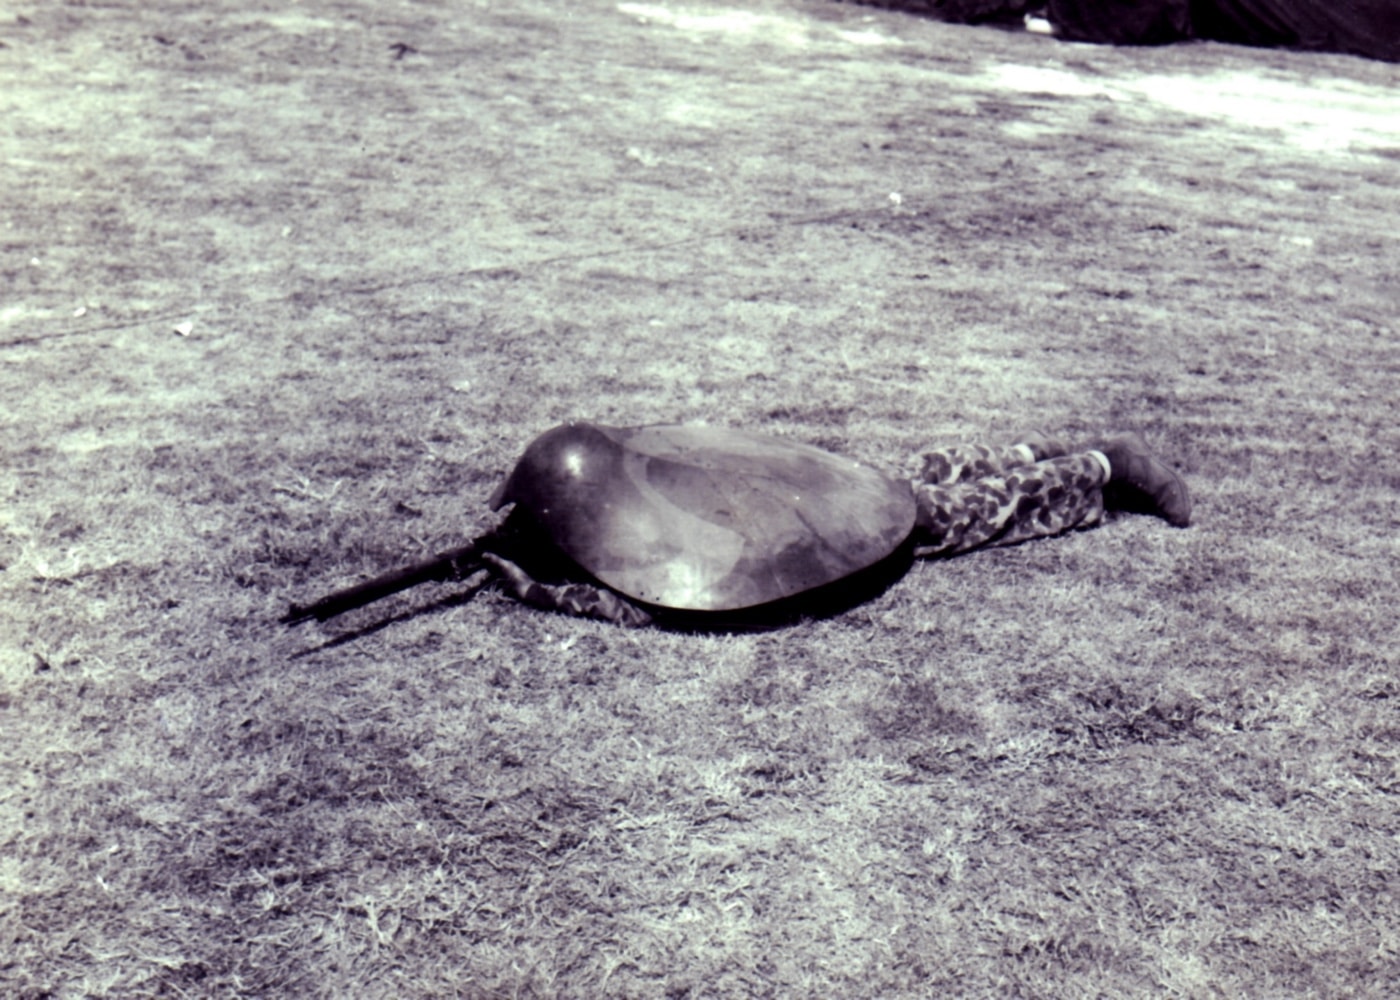 In this digital photograph, we see a U.S. Marine testing a turtle shell style of armor used by Japanese snipers in the Second World War. Japanese soldiers used light armor throughout the war - especially on the Japanese home islands. This style of armor could offer protection from shrapnel and low velocity rounds. 